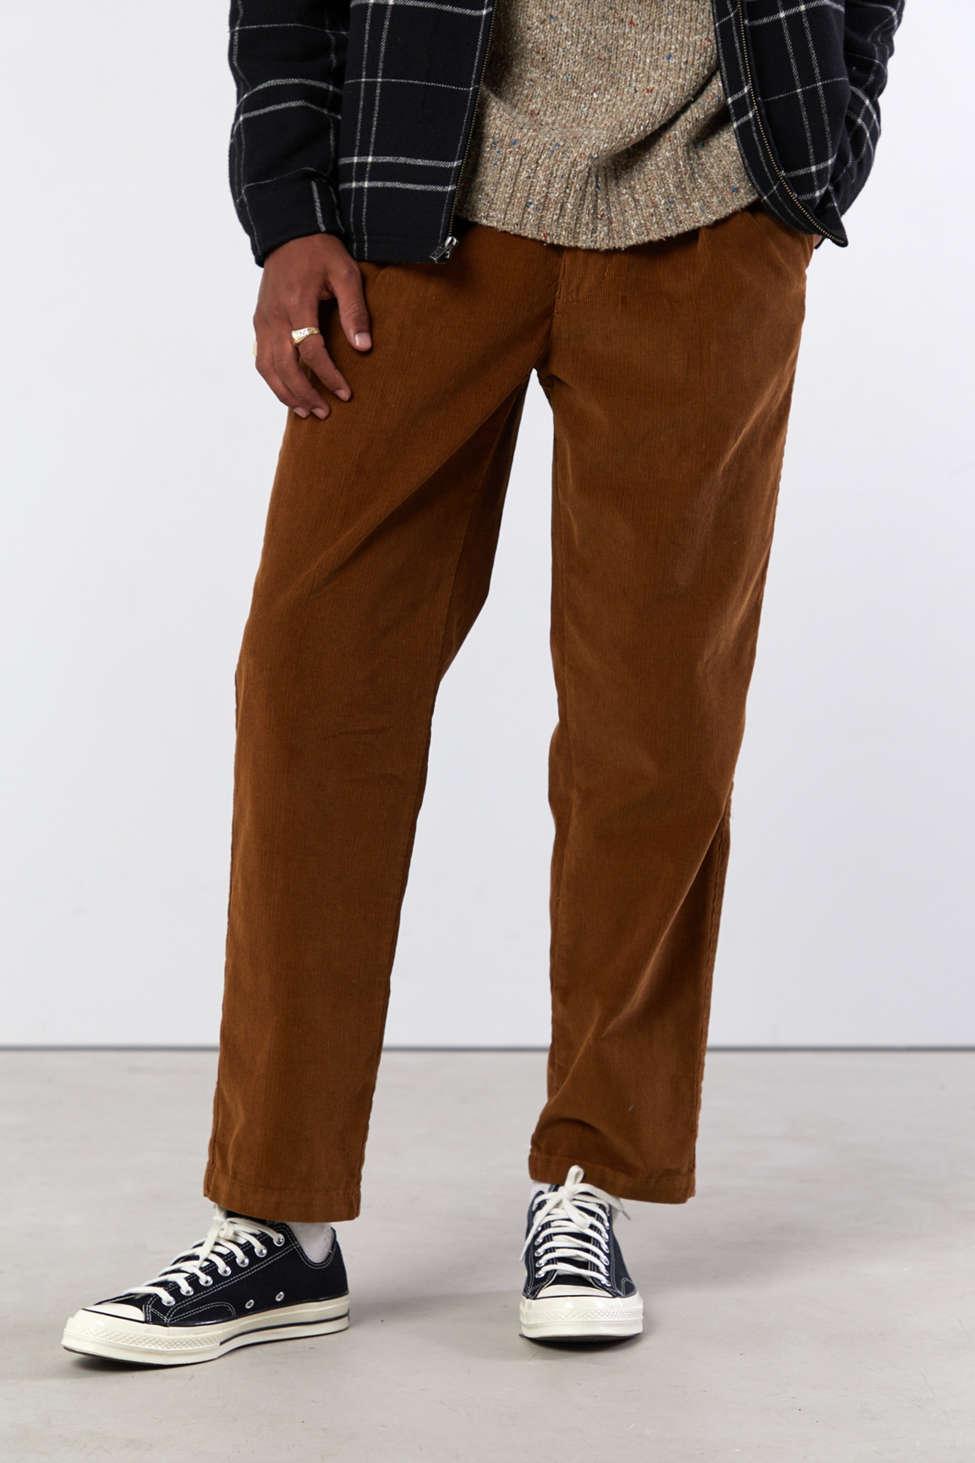 Urban Outfitters Uo Double Pleated Corduroy Pant in Brown for Men - Lyst